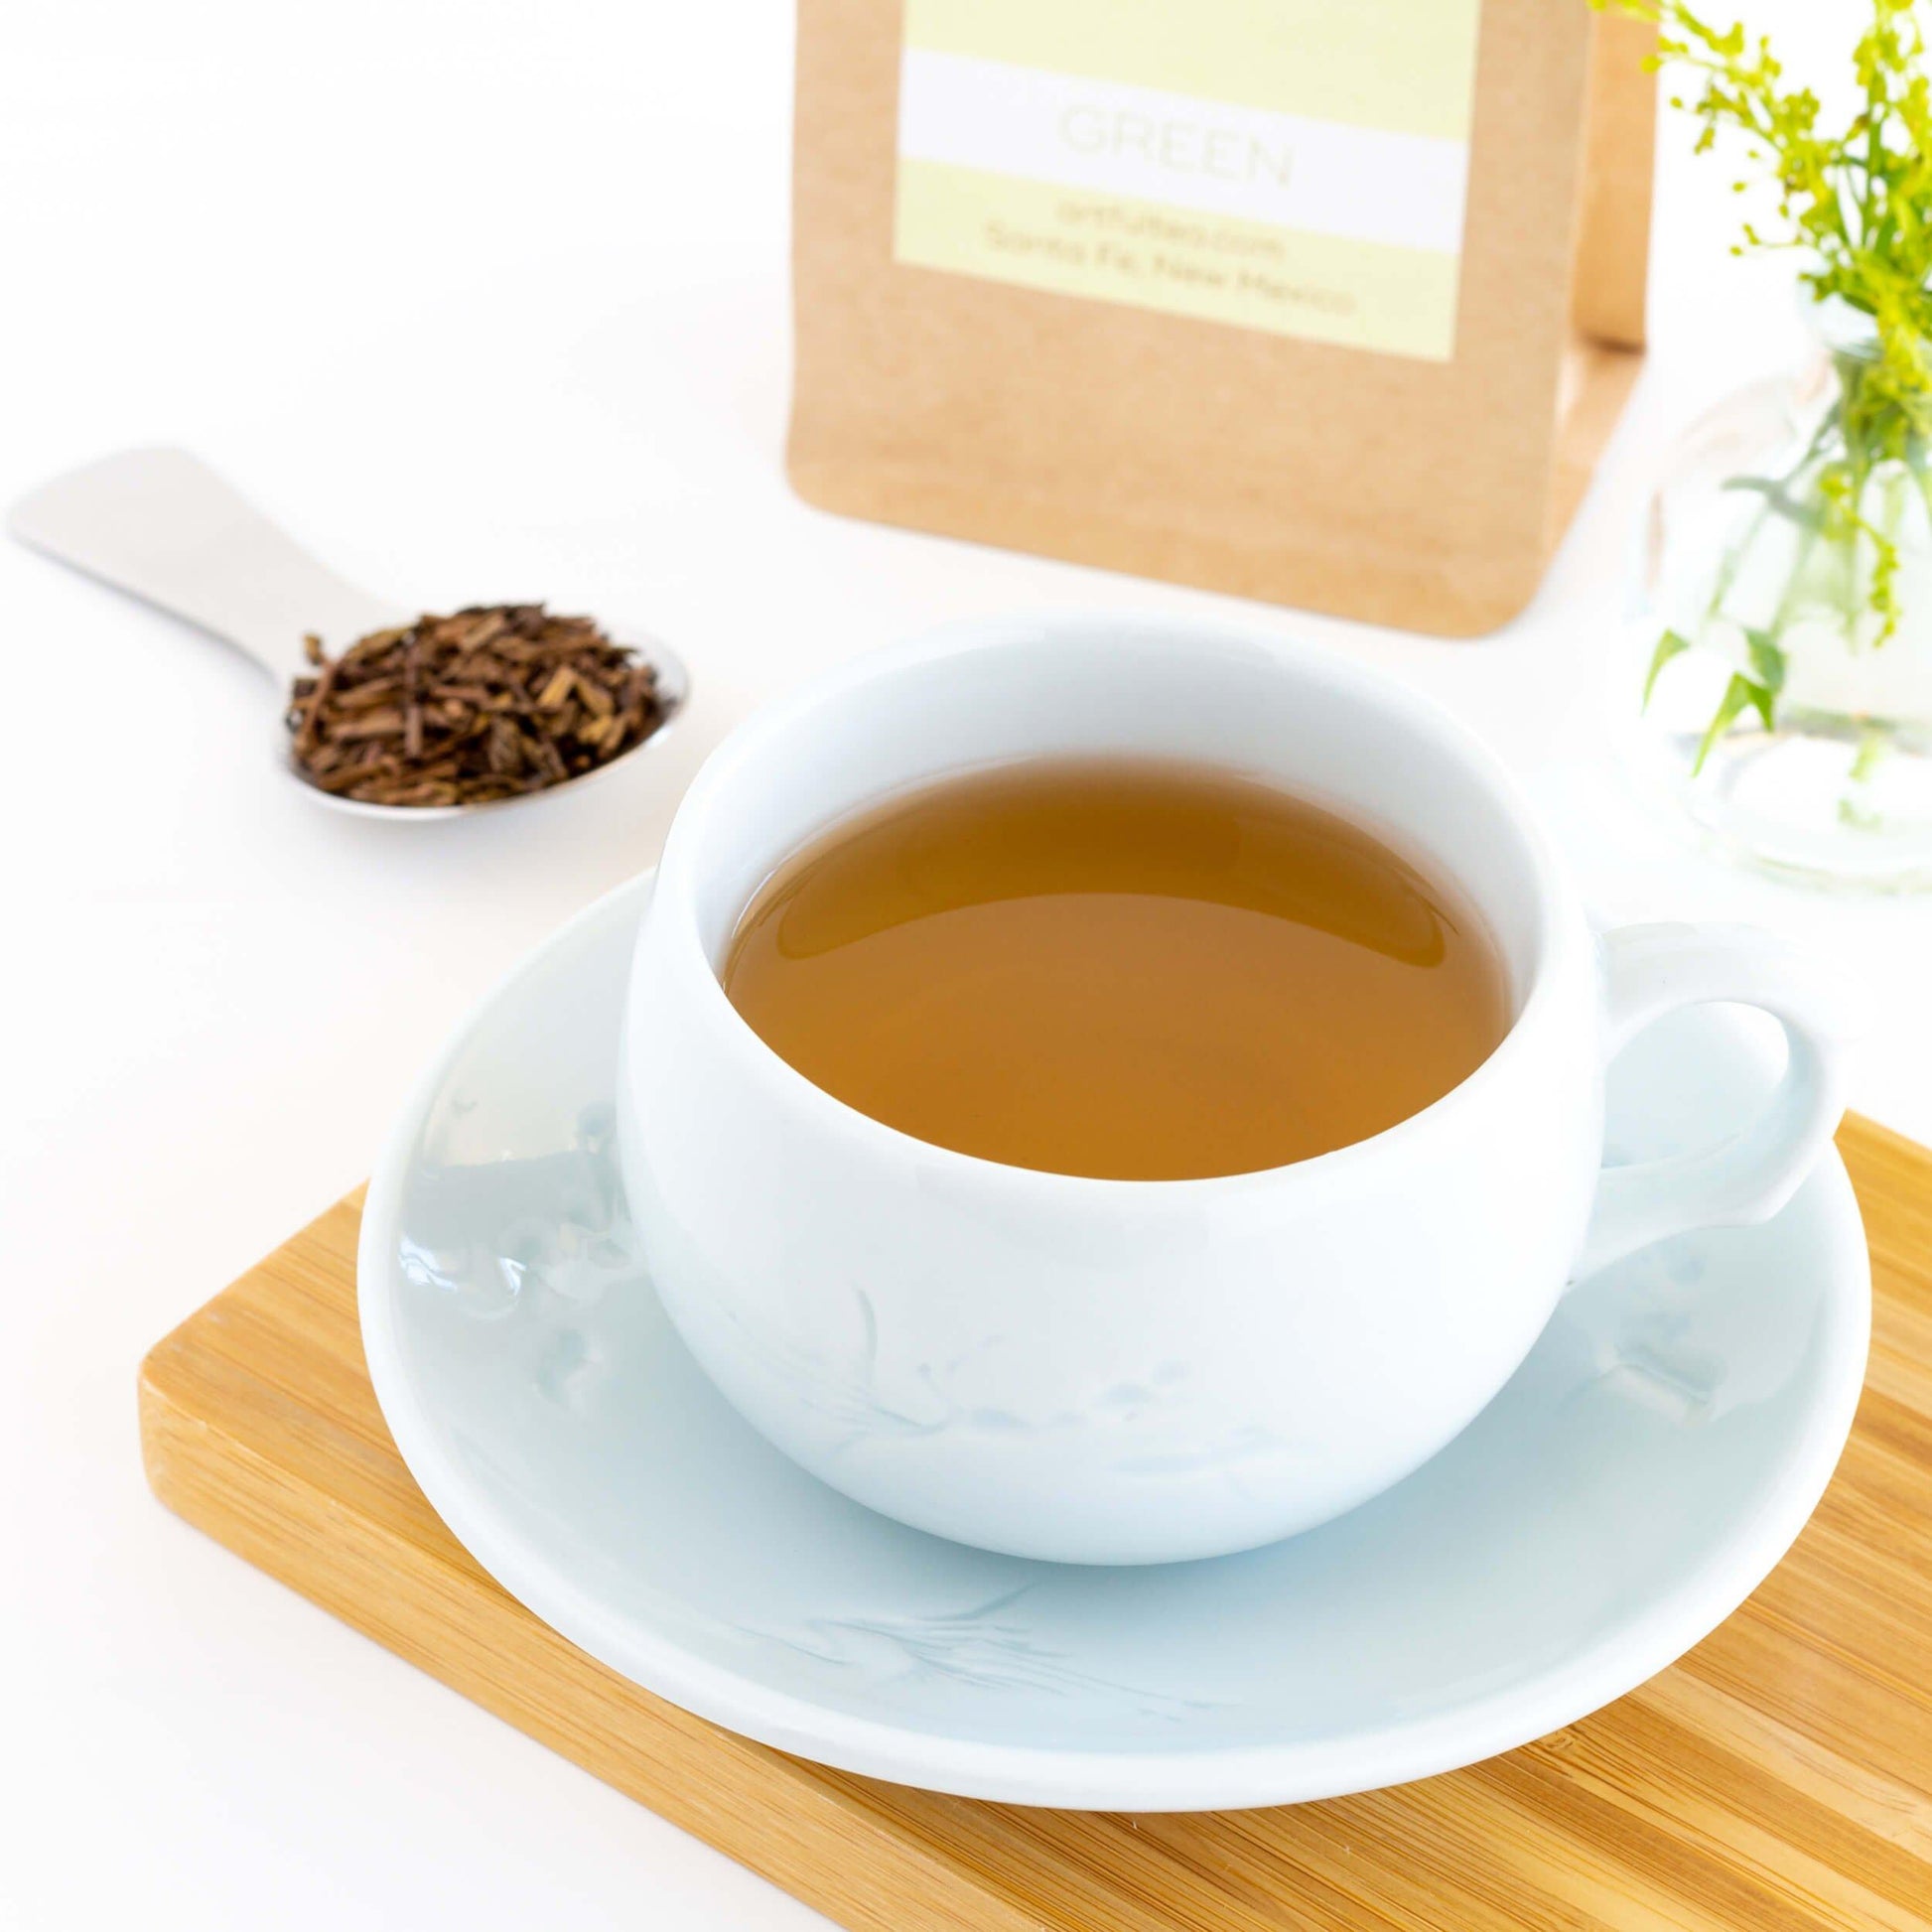 Hojicha Organic Green Tea shown as brewed tea in a pale blue teacup and saucer on a bamboo tray, with a silver scoop of tea leaves and a kraft bag of packaged tea in the background